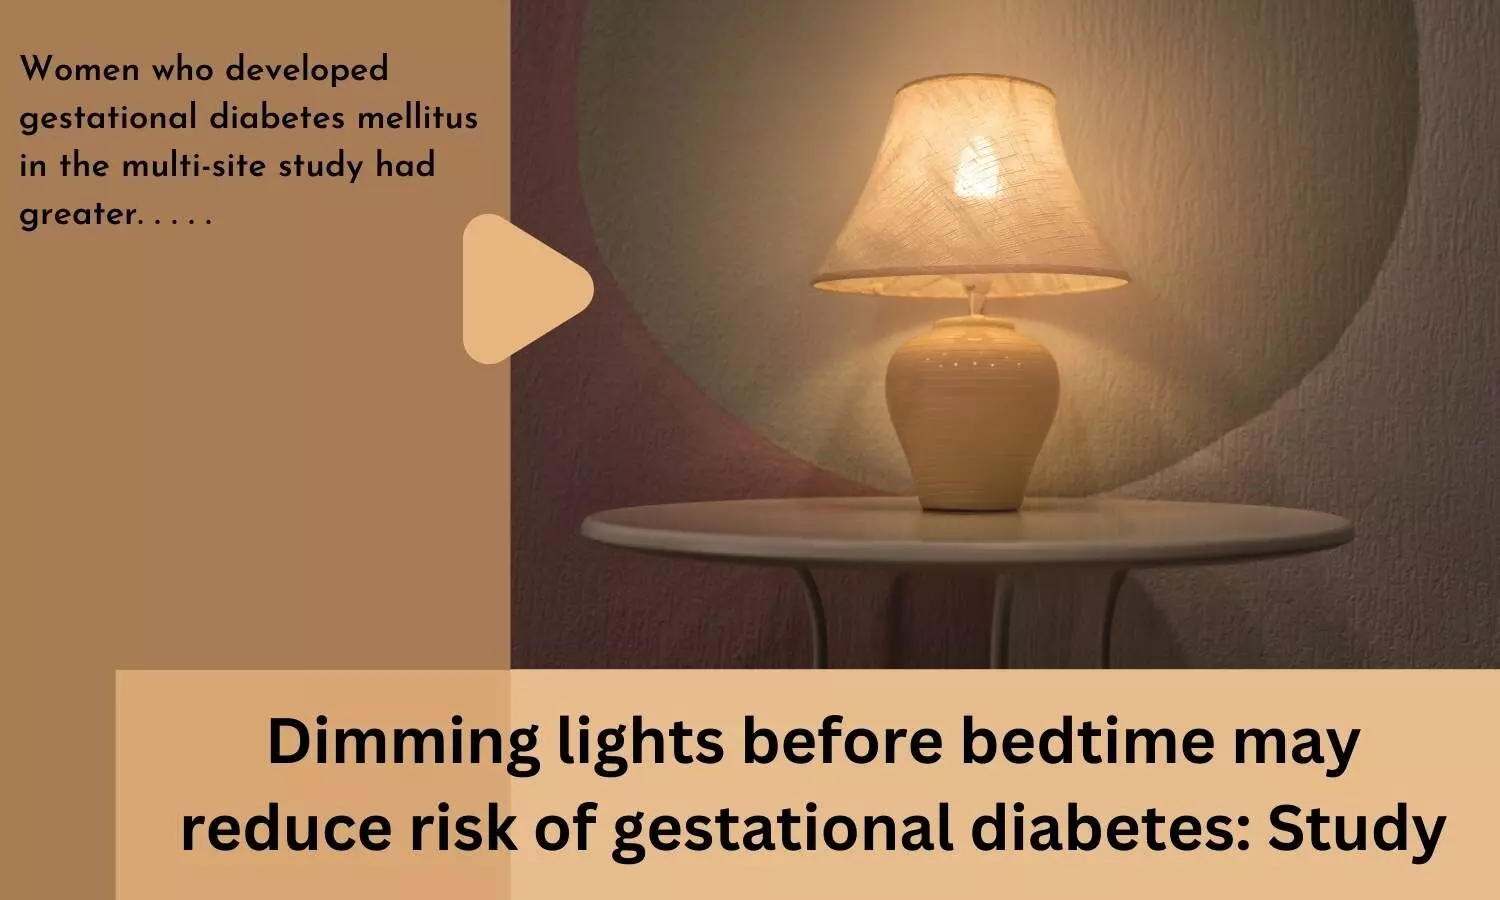 Dimming lights before bedtime may reduce risk of gestational diabetes: Study